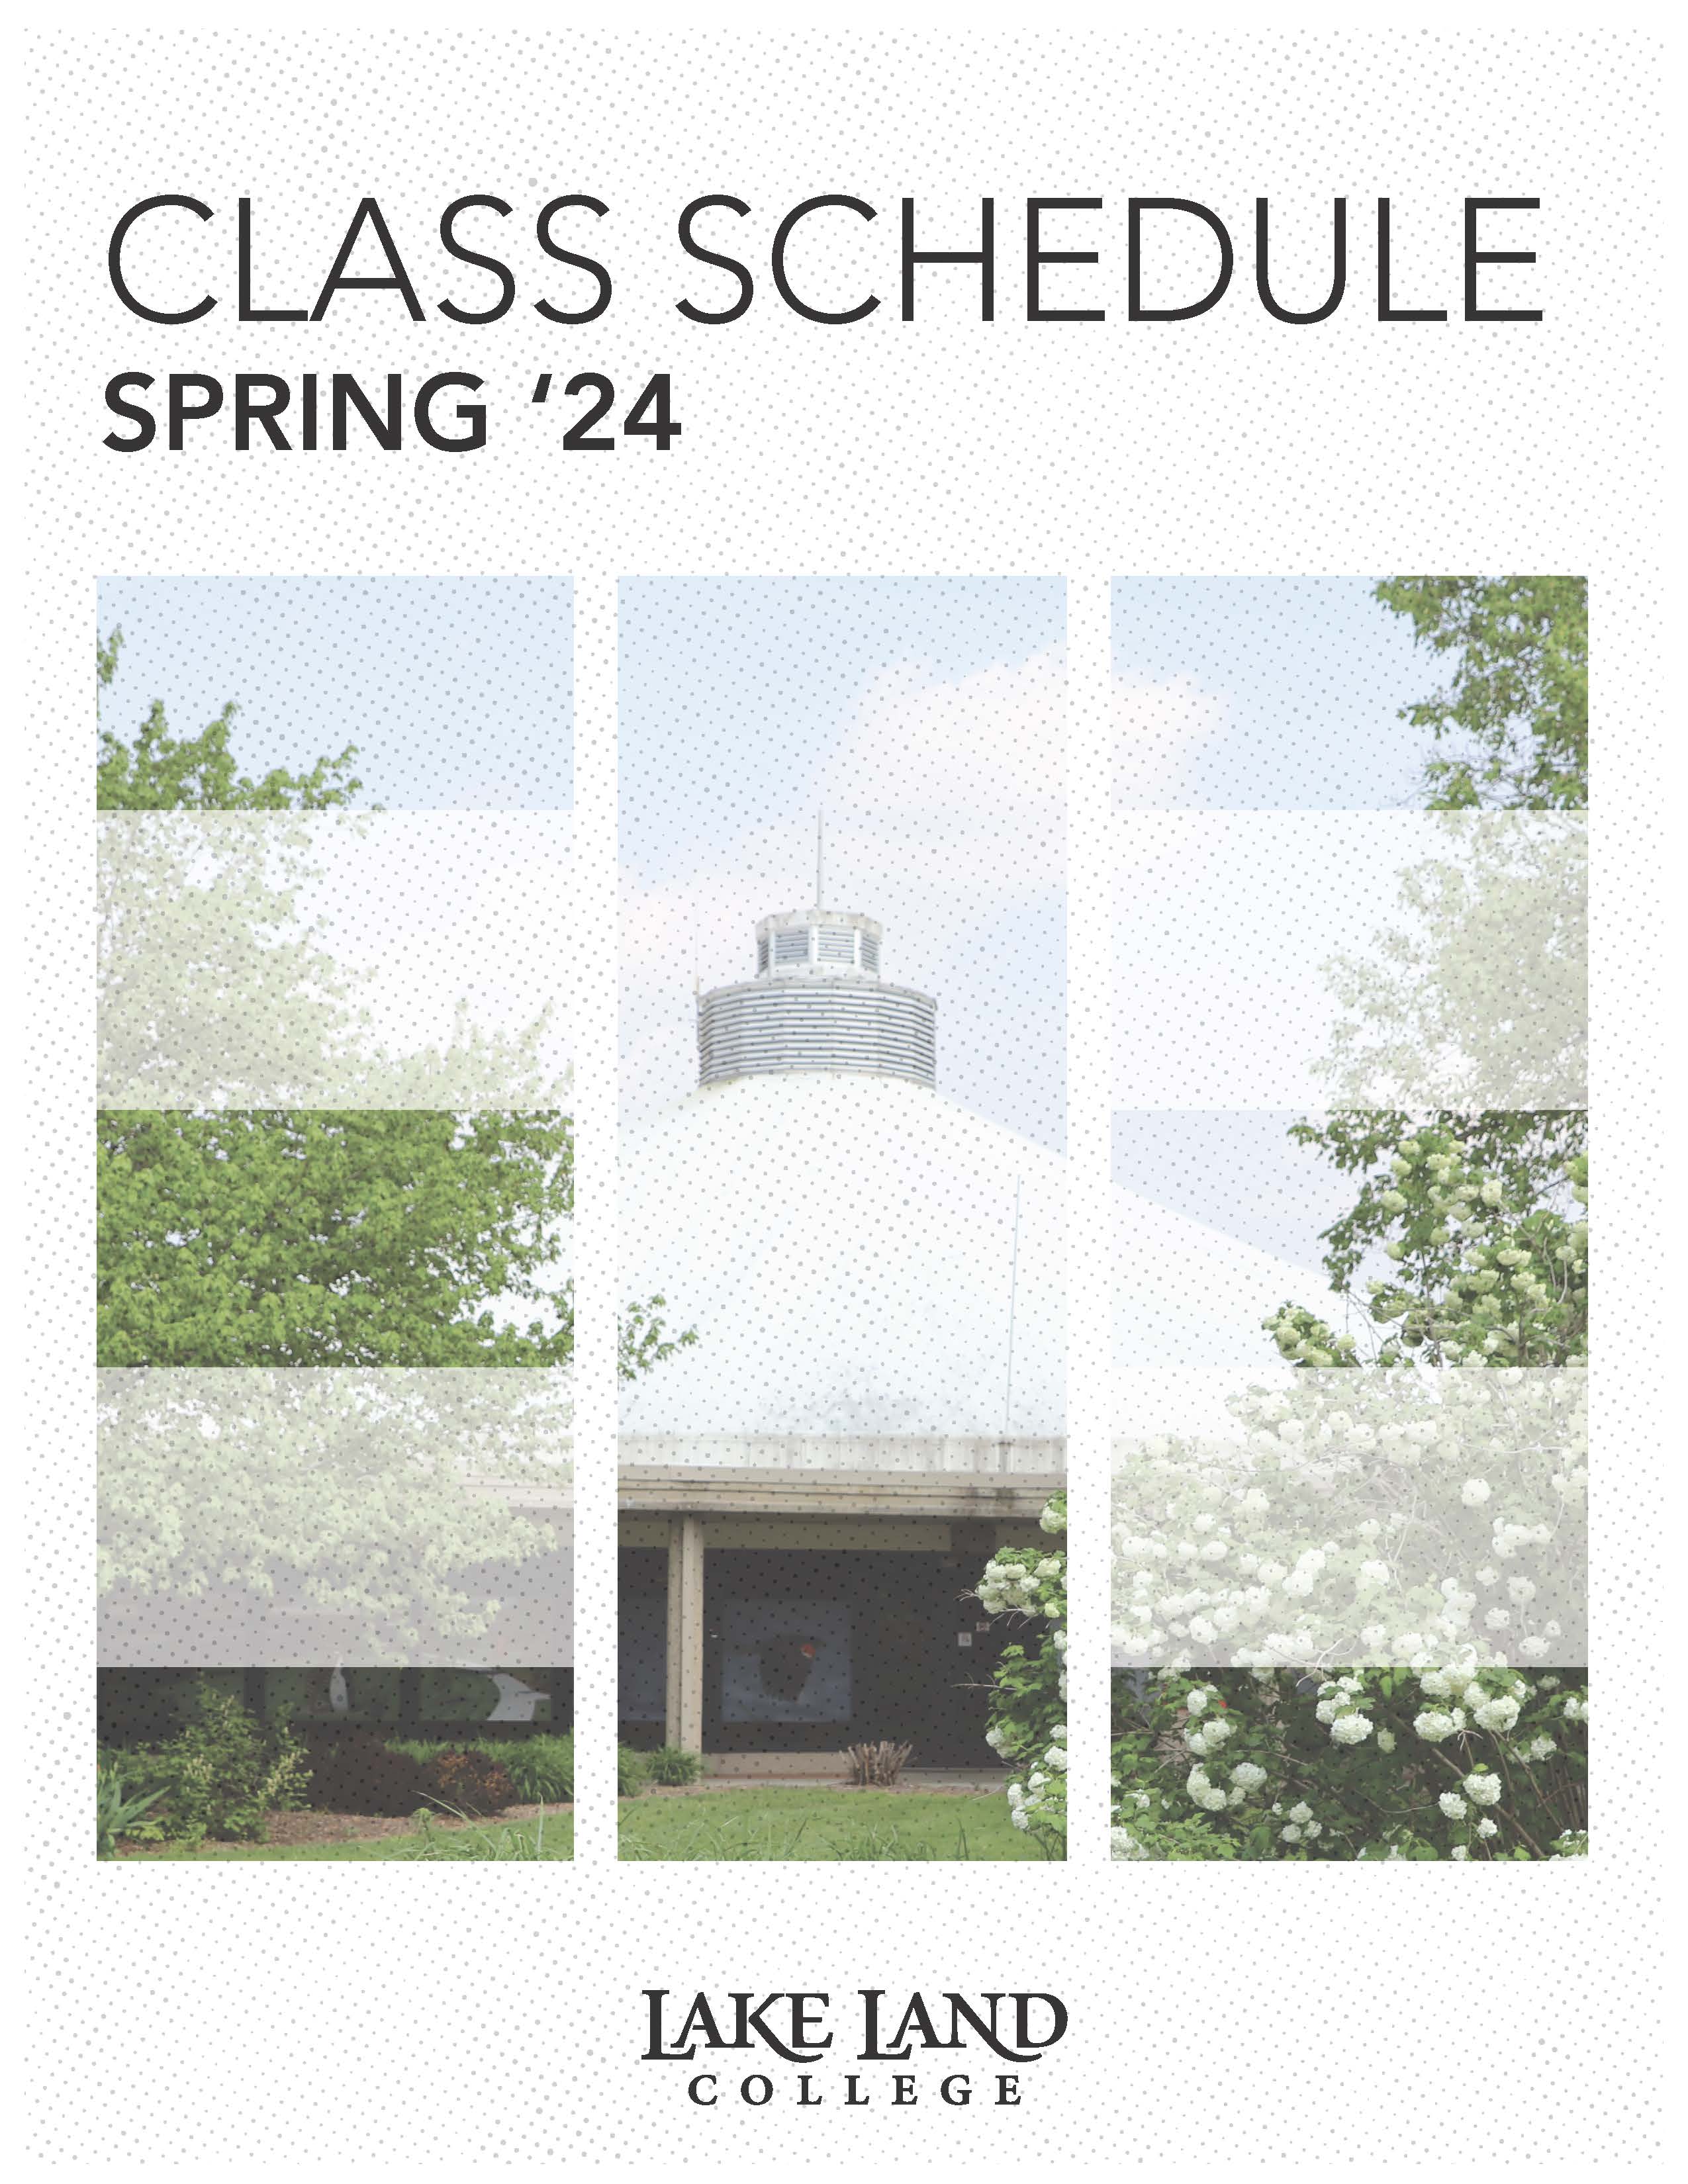 Spring Schedule cover page